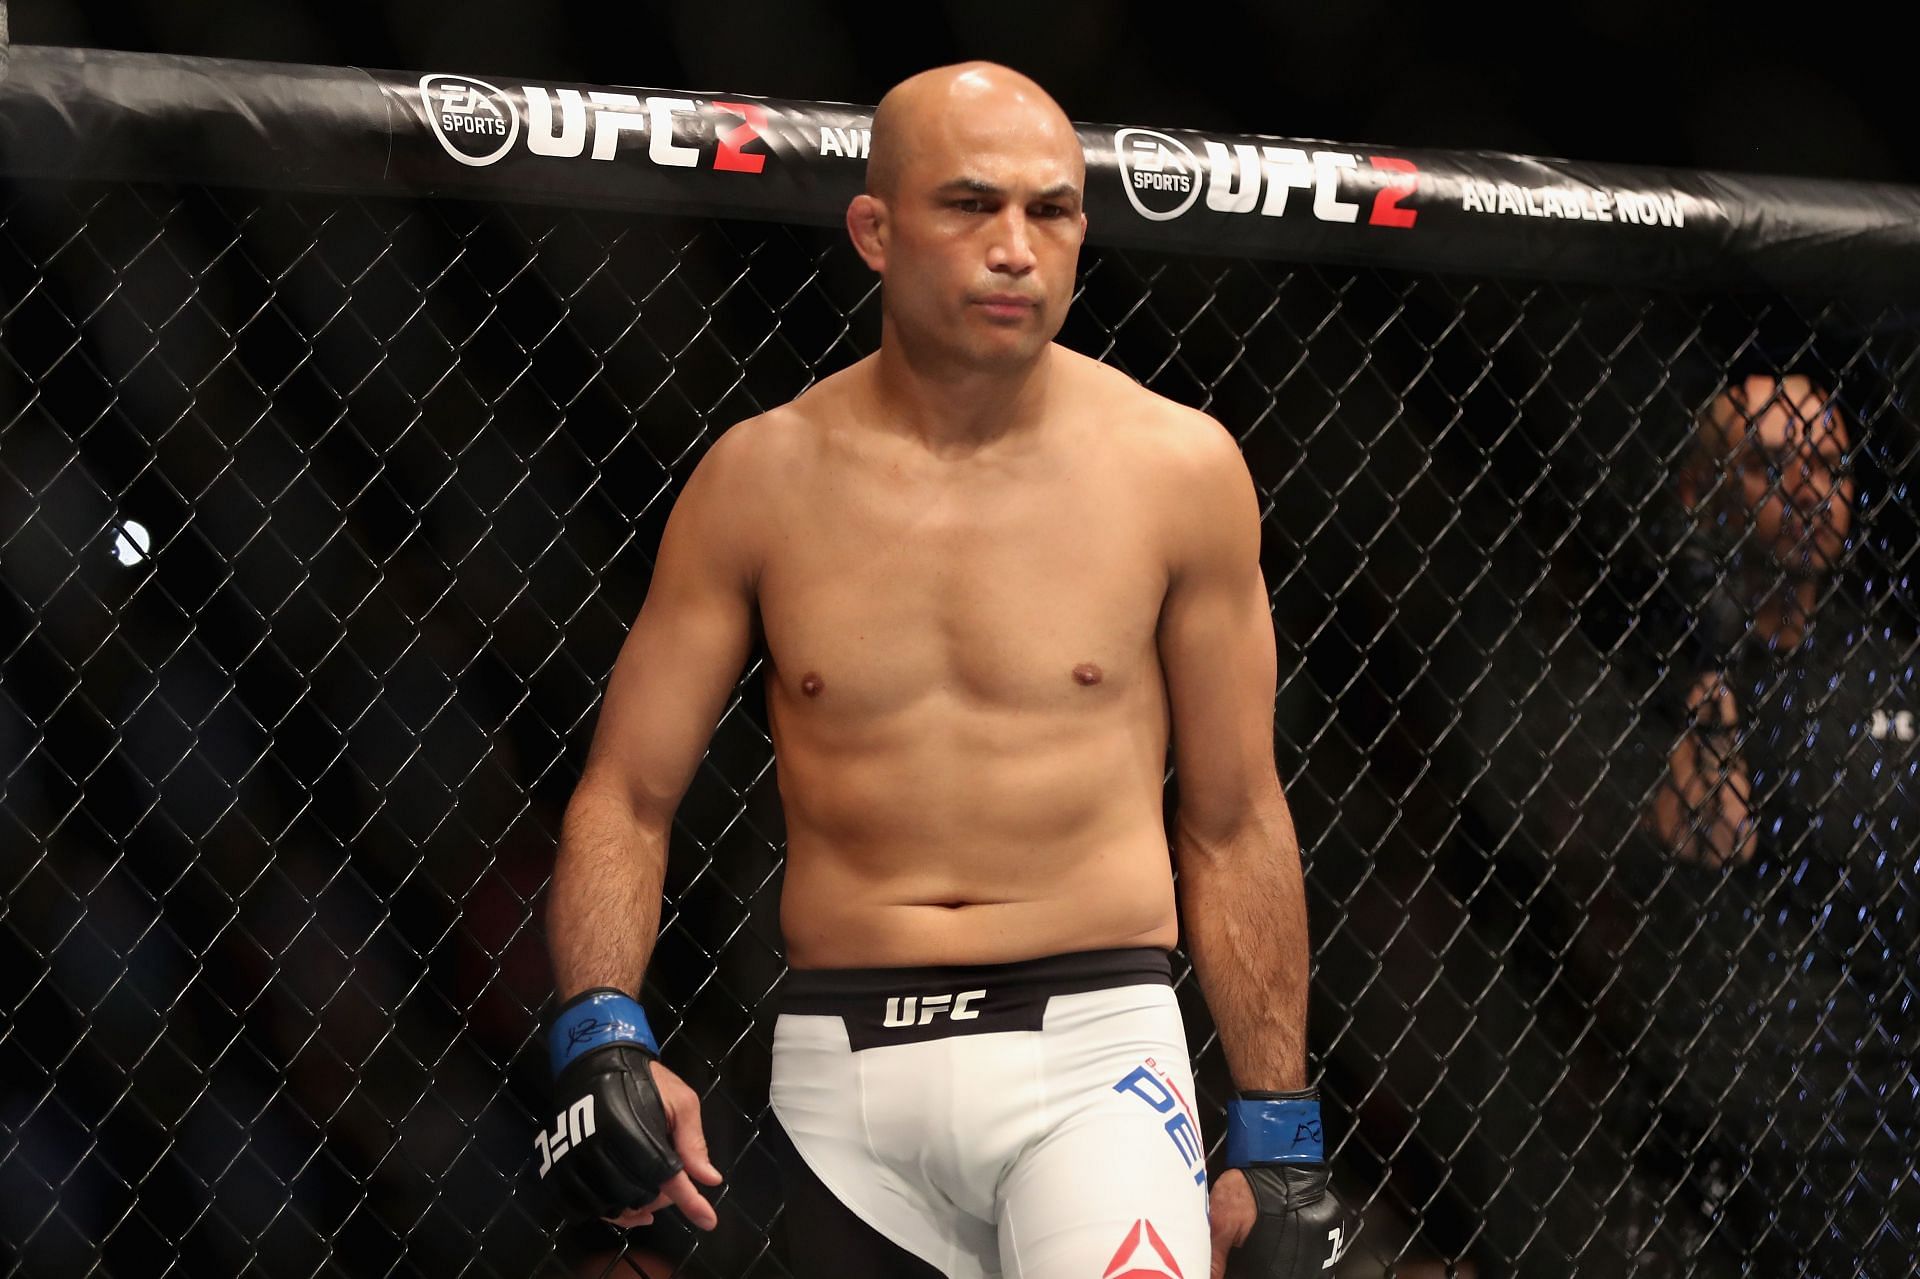 BJ Penn was knocked out by an unknown man in a street fight